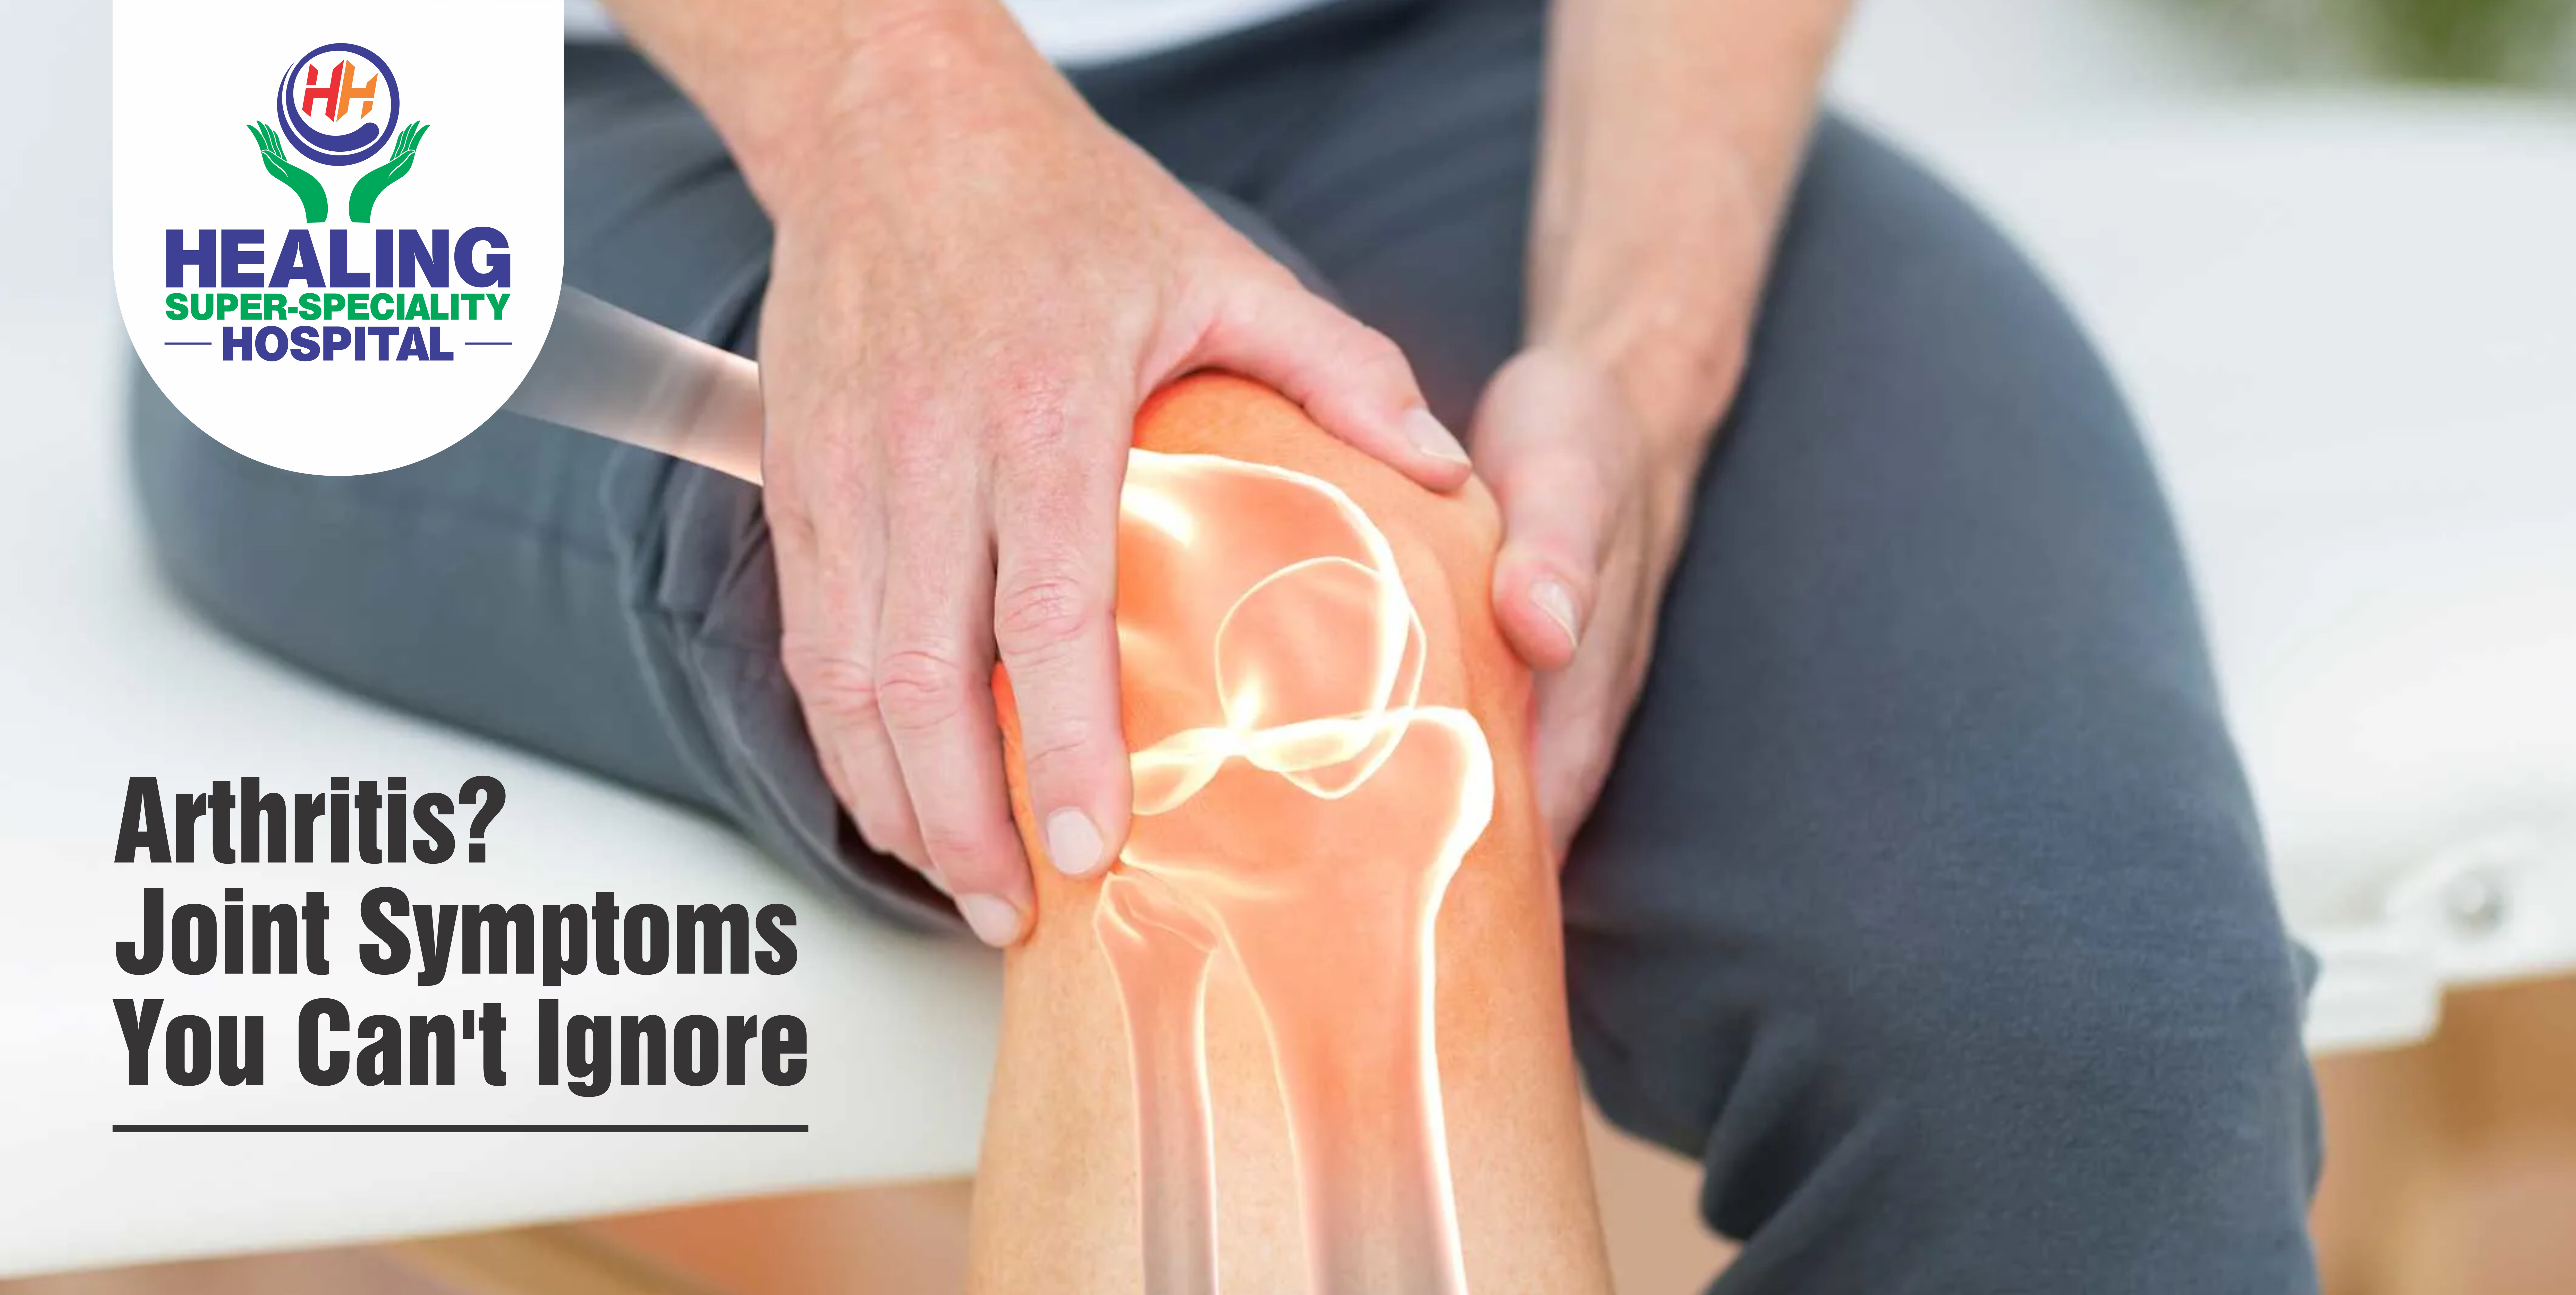 Arthritis? Joint Symptoms You Can’t Ignore